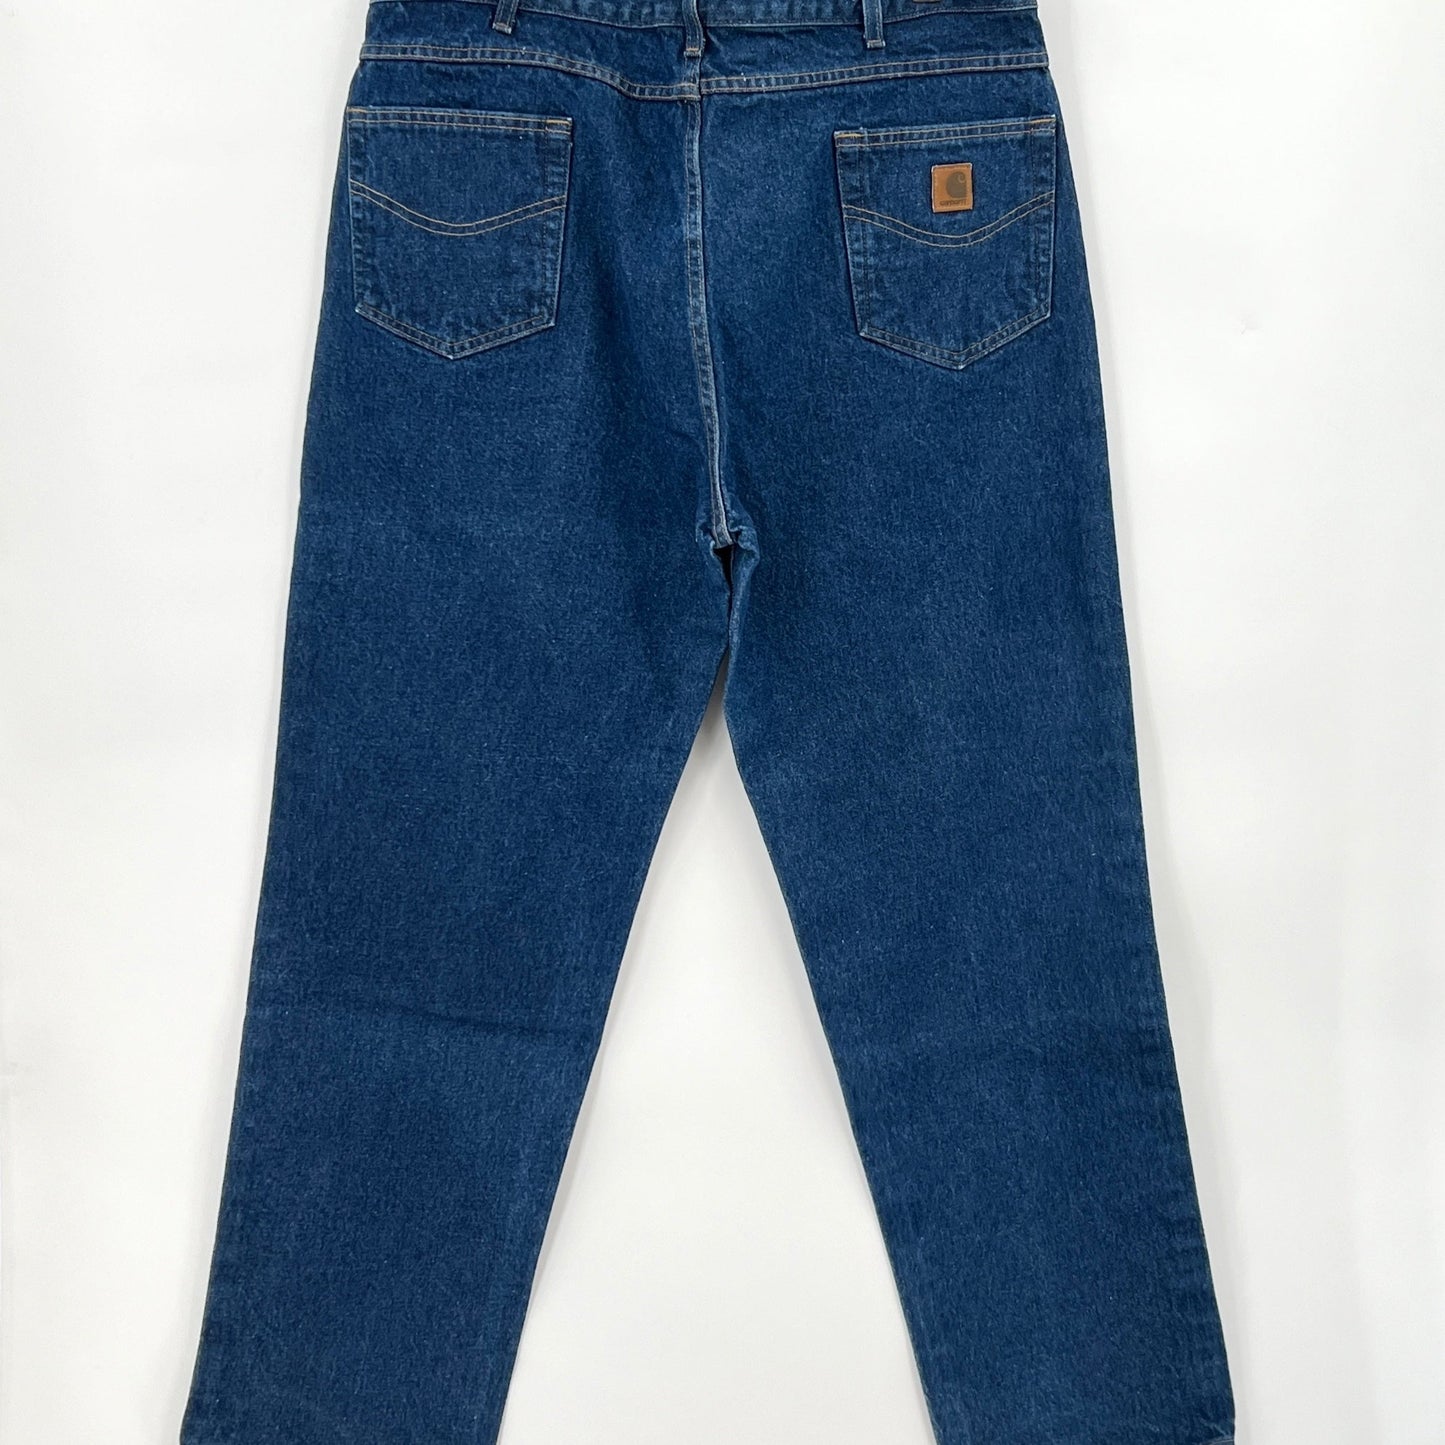 SOLD - Carhartt Relax Fit Blue Jeans 42x34